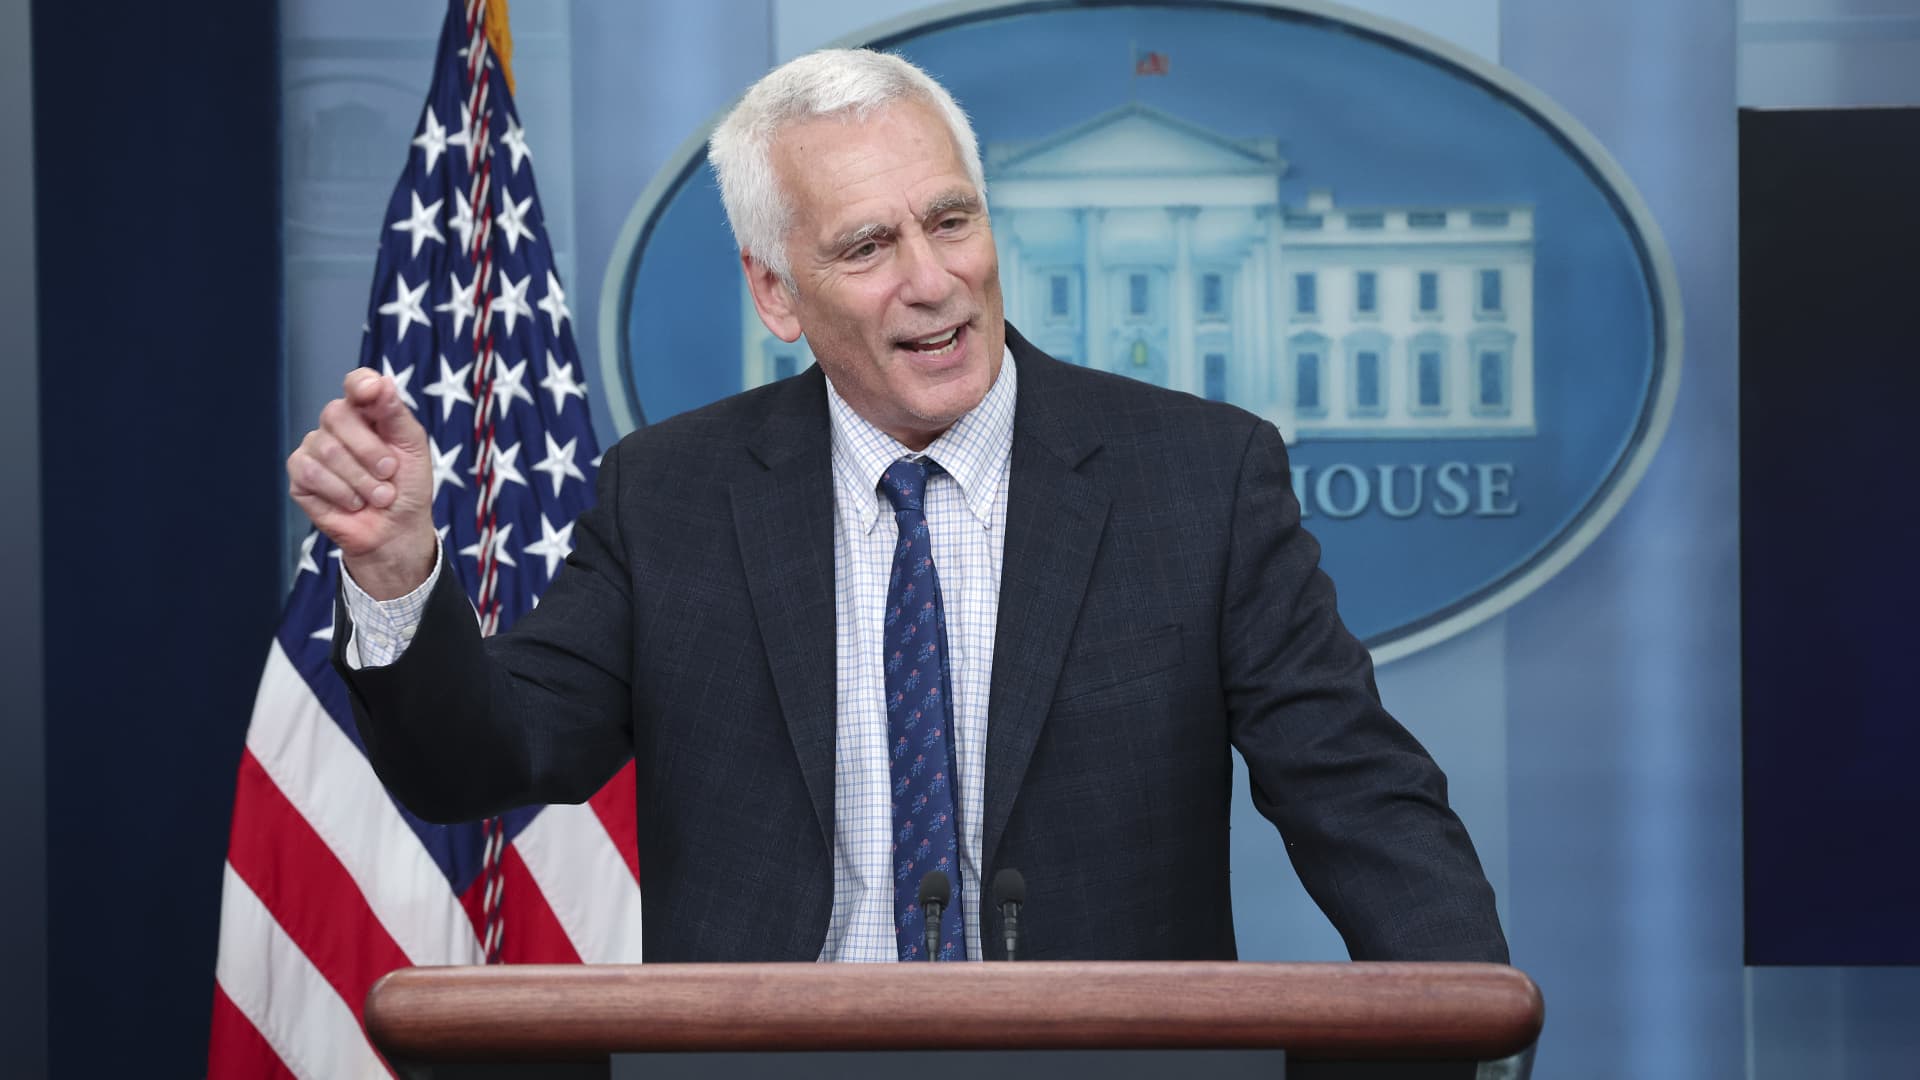 White House economist Jared Bernstein defends Biden's billionaire tax outlined in State of the Union